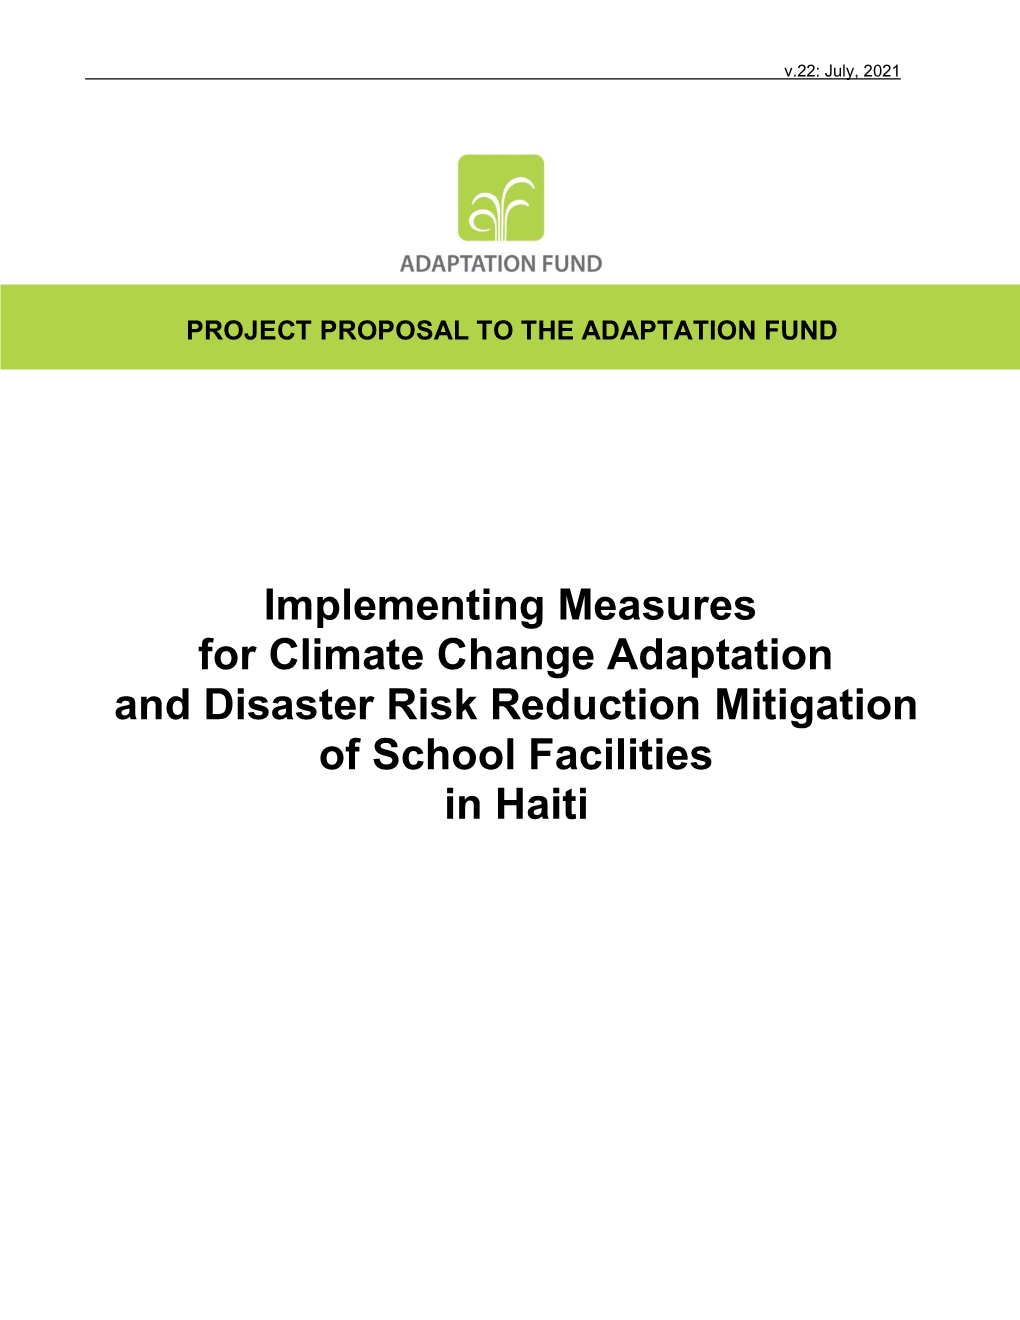 Implementing Measures for Climate Change Adaptation and Disaster Risk Reduction Mitigation of School Facilities in Haiti